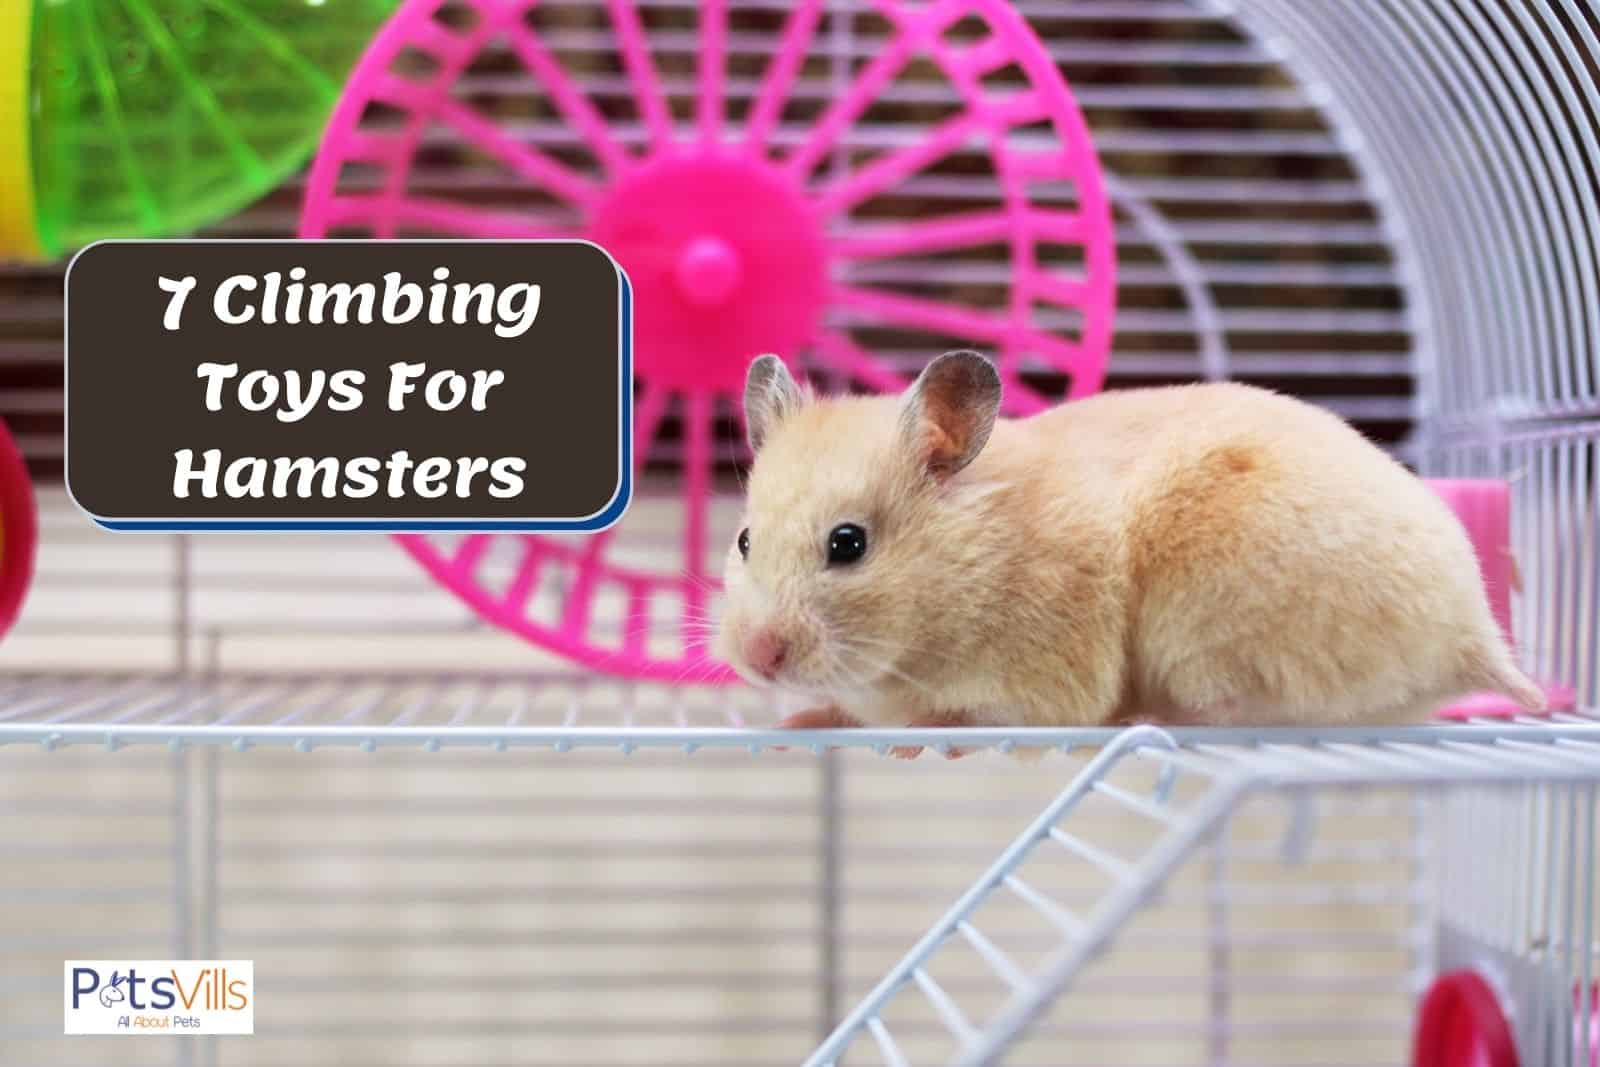 a hamster playing with toy in a cage